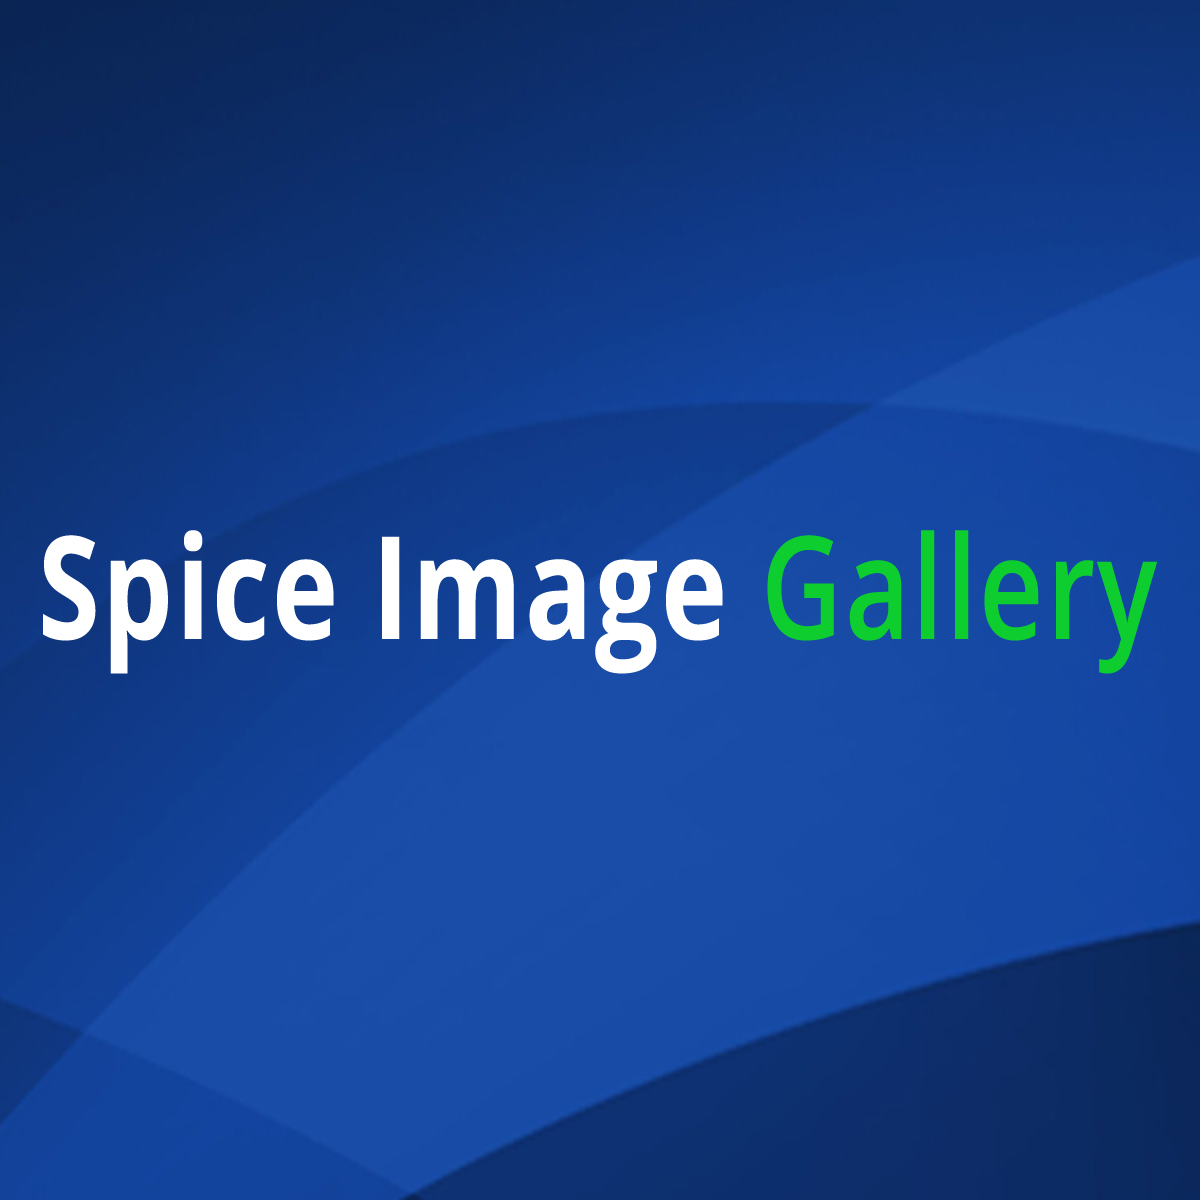 Spice Image Gallery